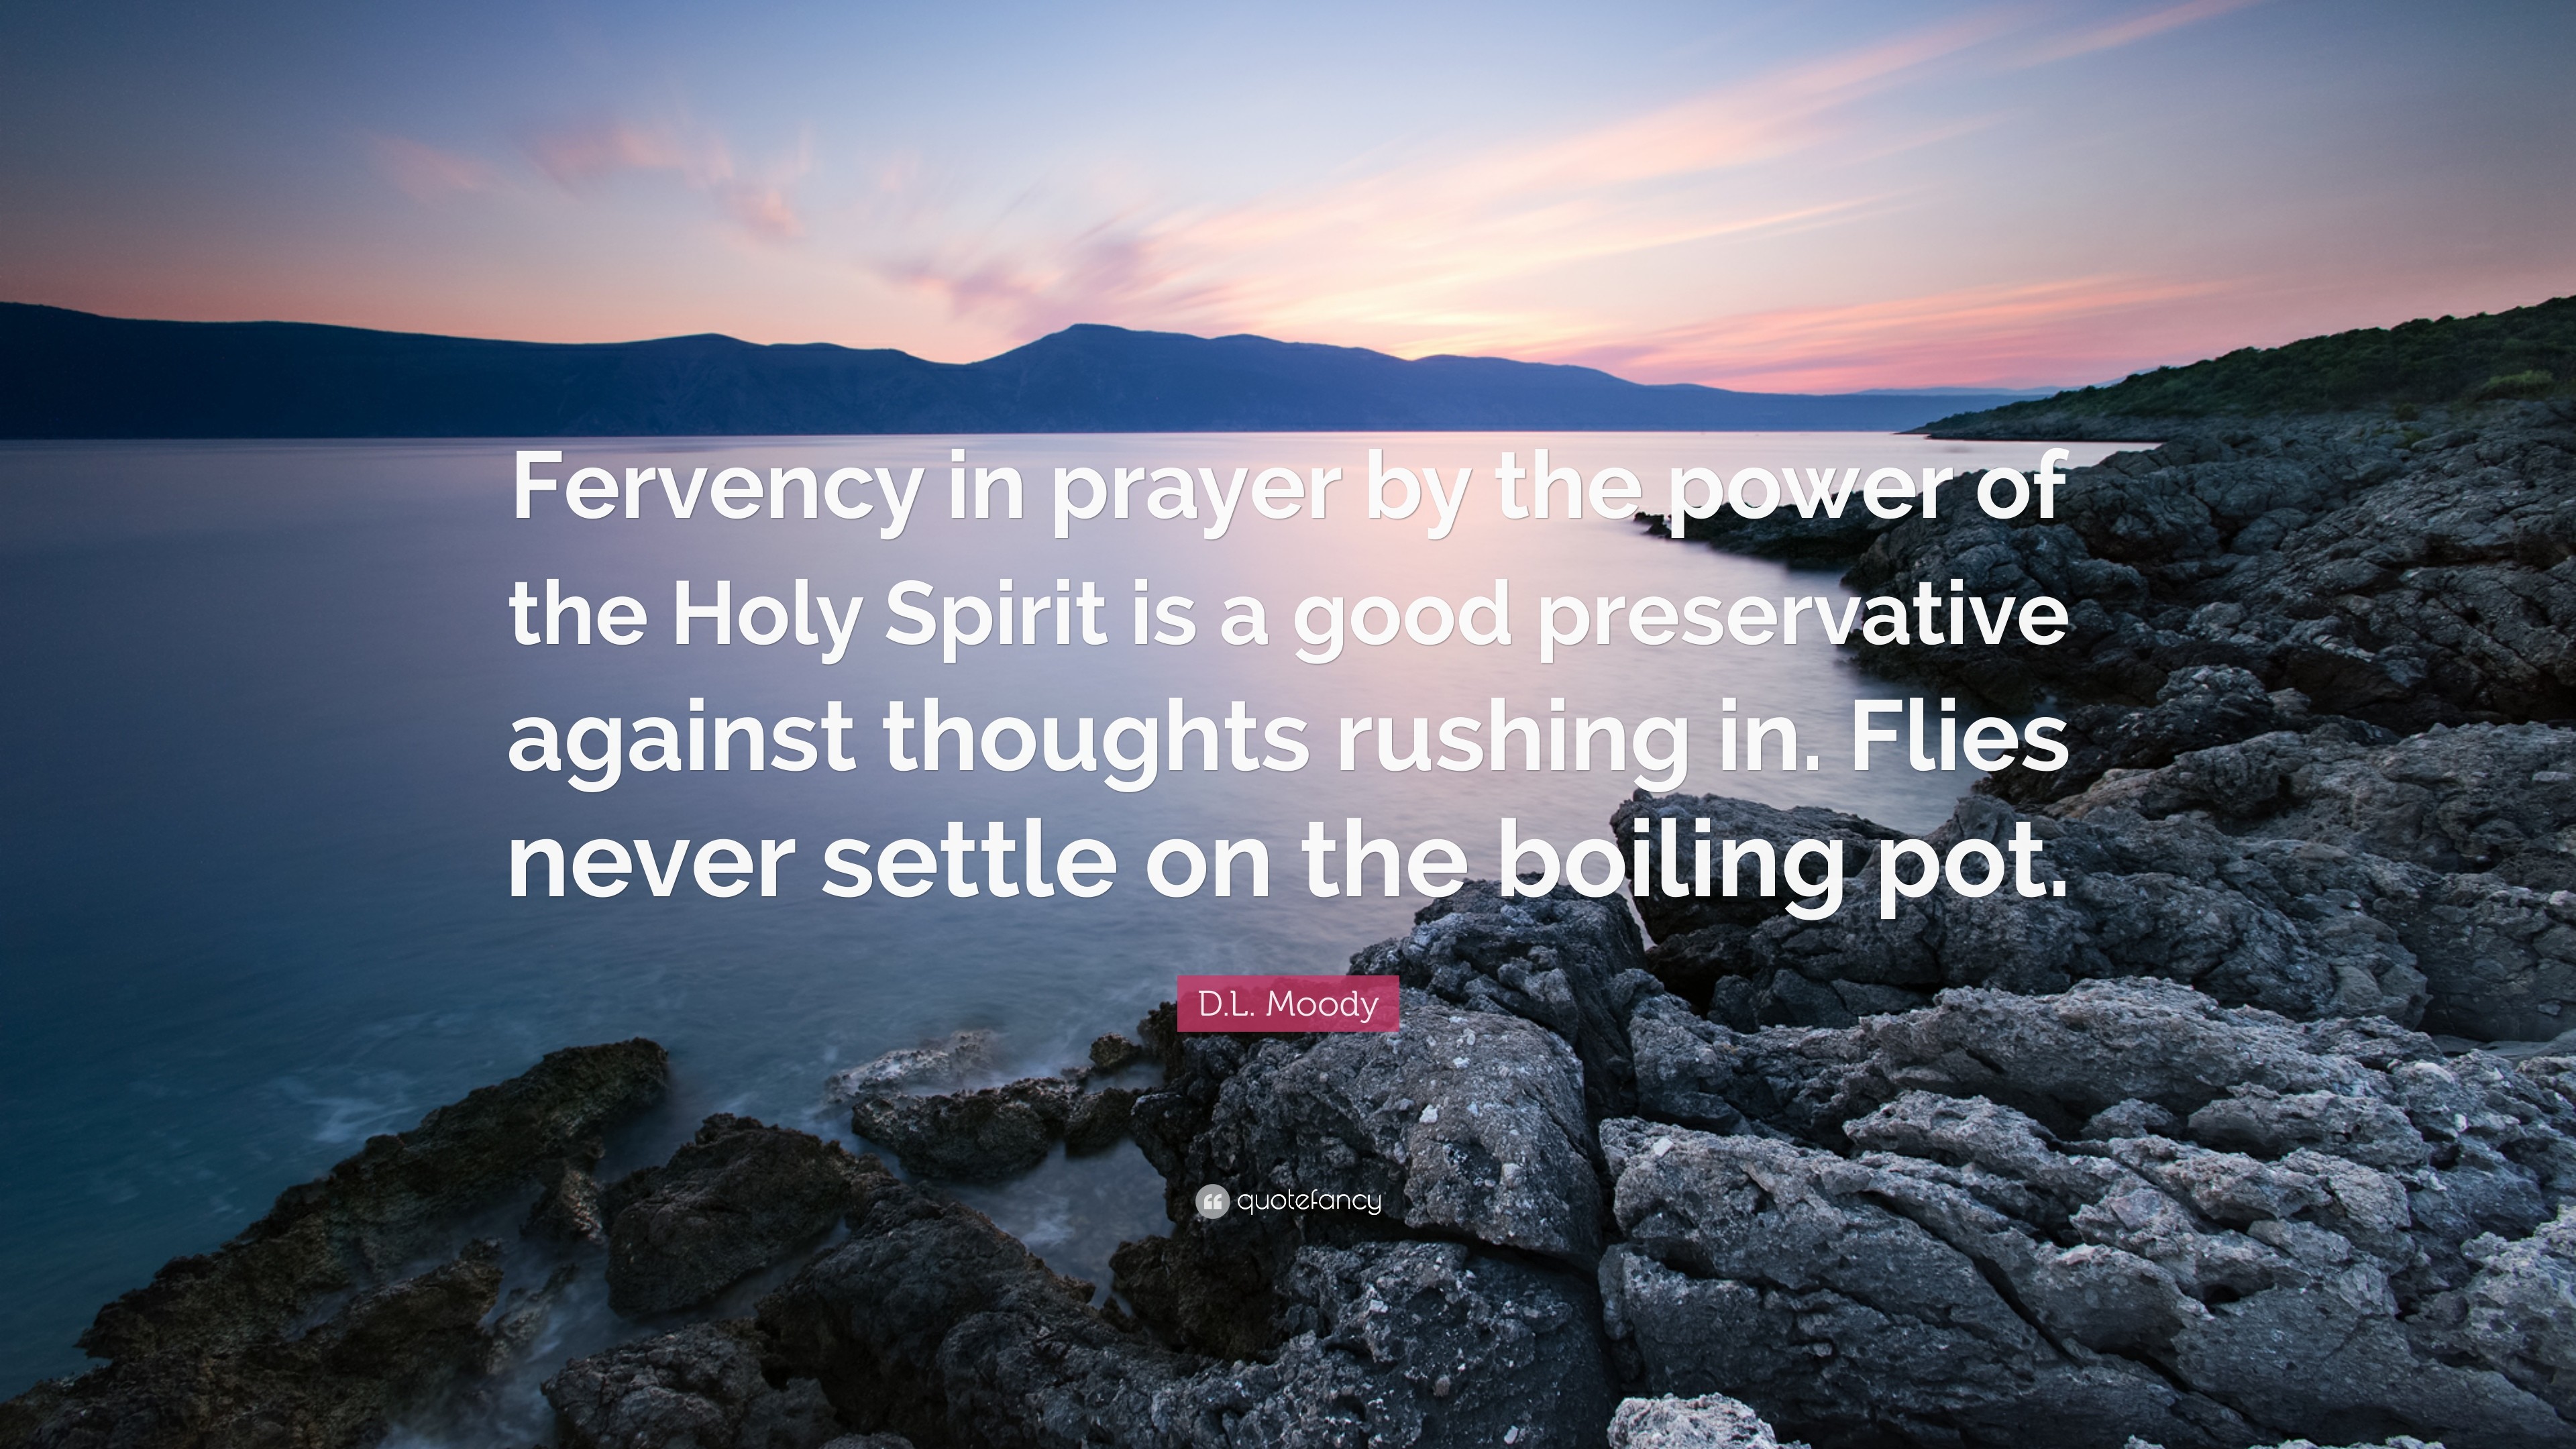 3840x2160 D.L. Moody Quote: “Fervency in prayer by the power of the Holy Spirit is